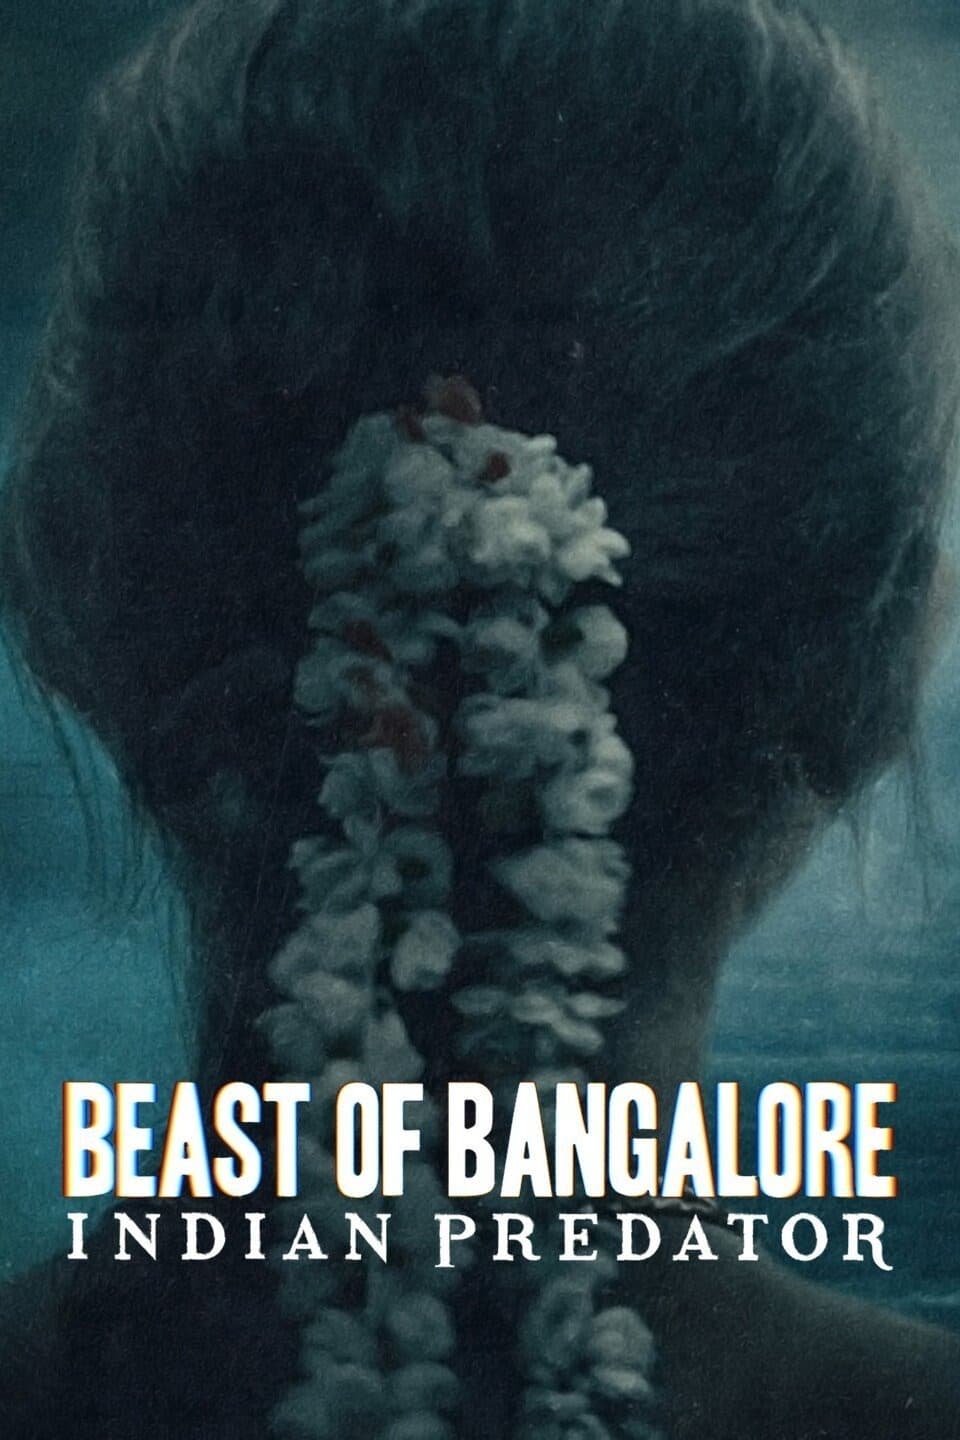 Beast of Bangalore: Indian Predator TV Shows About True Crime